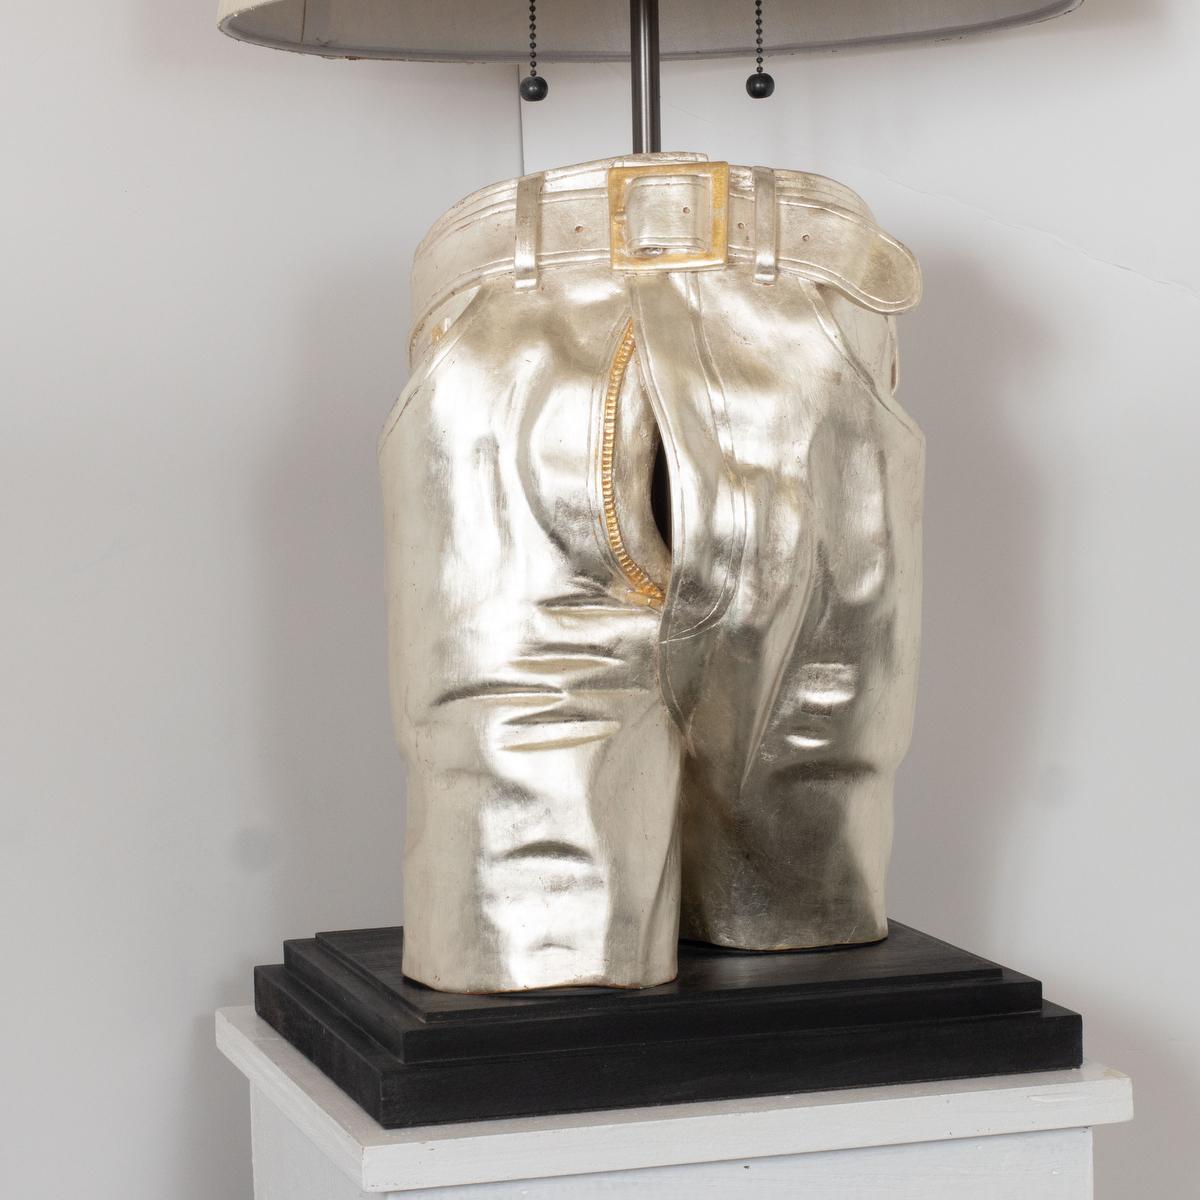 Single woodcarving table lamp with white gold finish depicting a pair of jeans in exquisite detail by master woodworker Carlos Villegas.